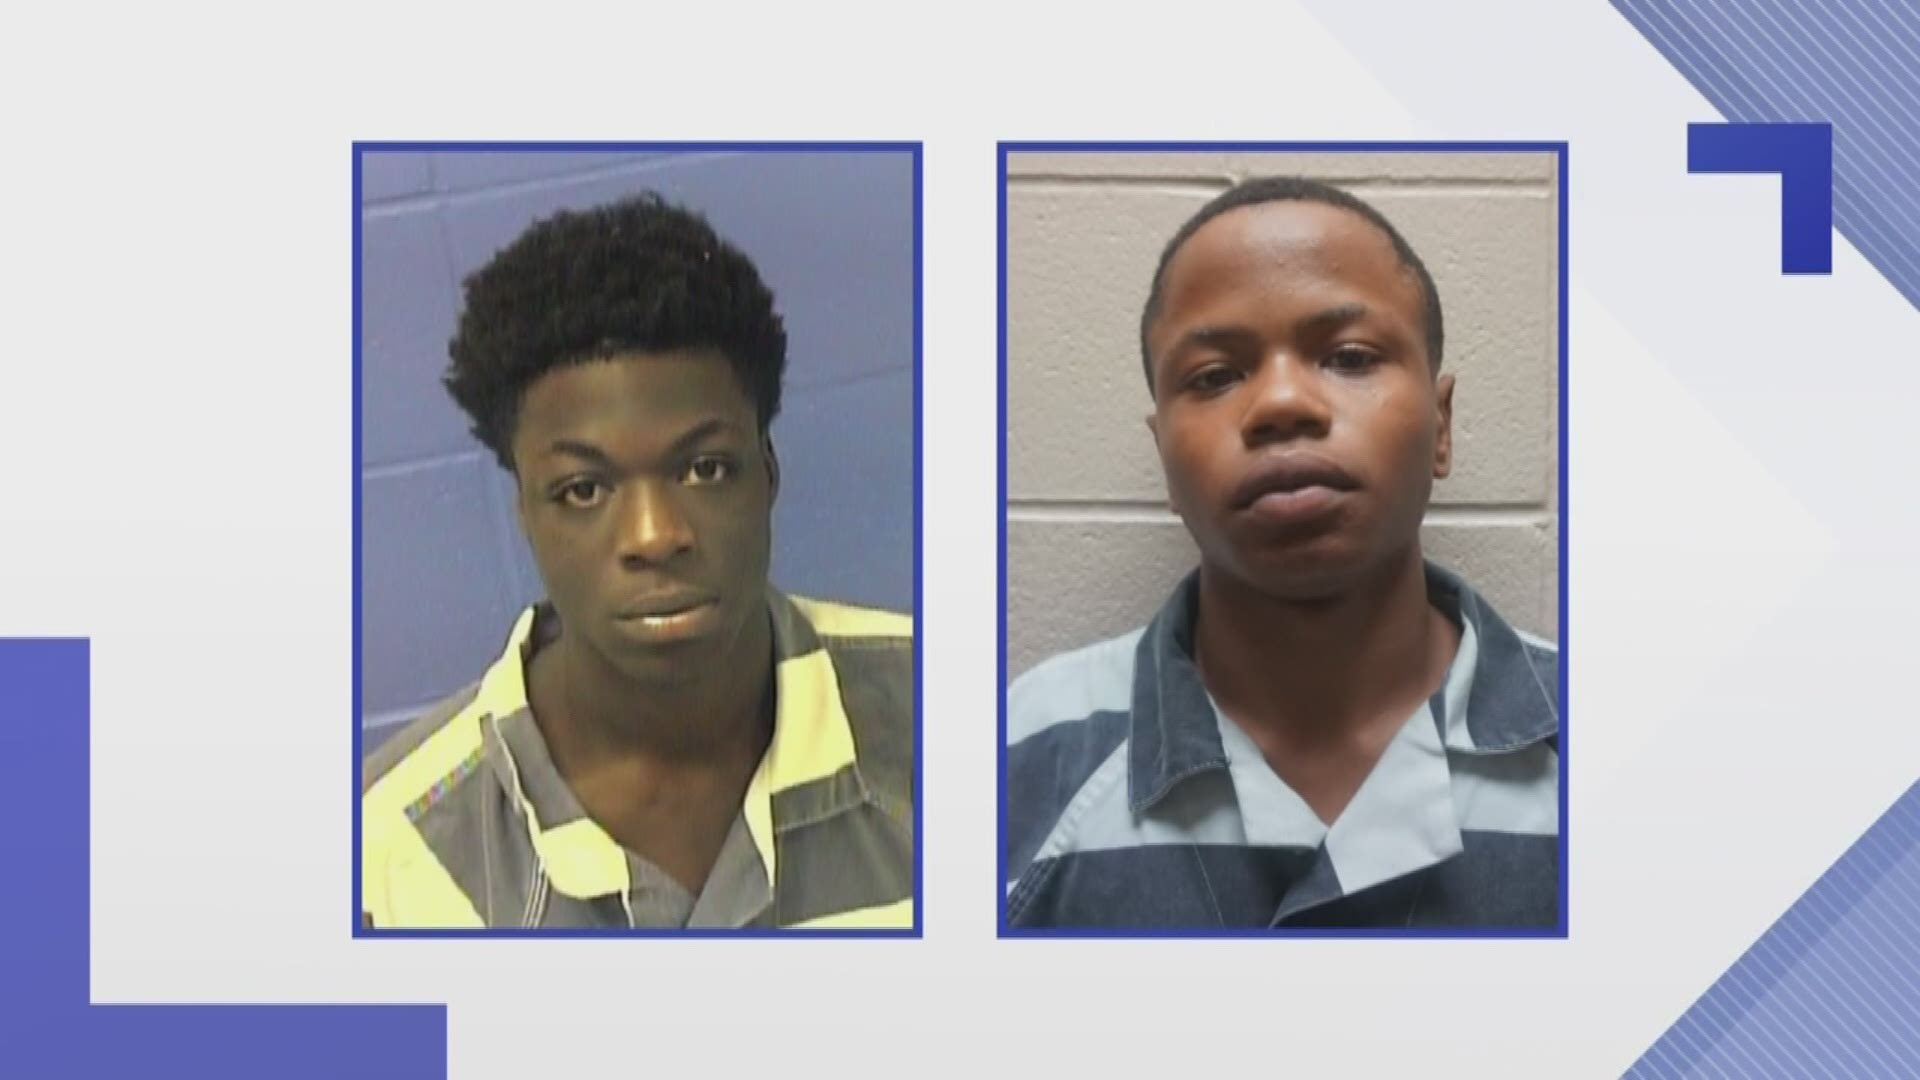 Two young men are now facing serious charges related to the strangulation death of an elderly woman murdered in July.